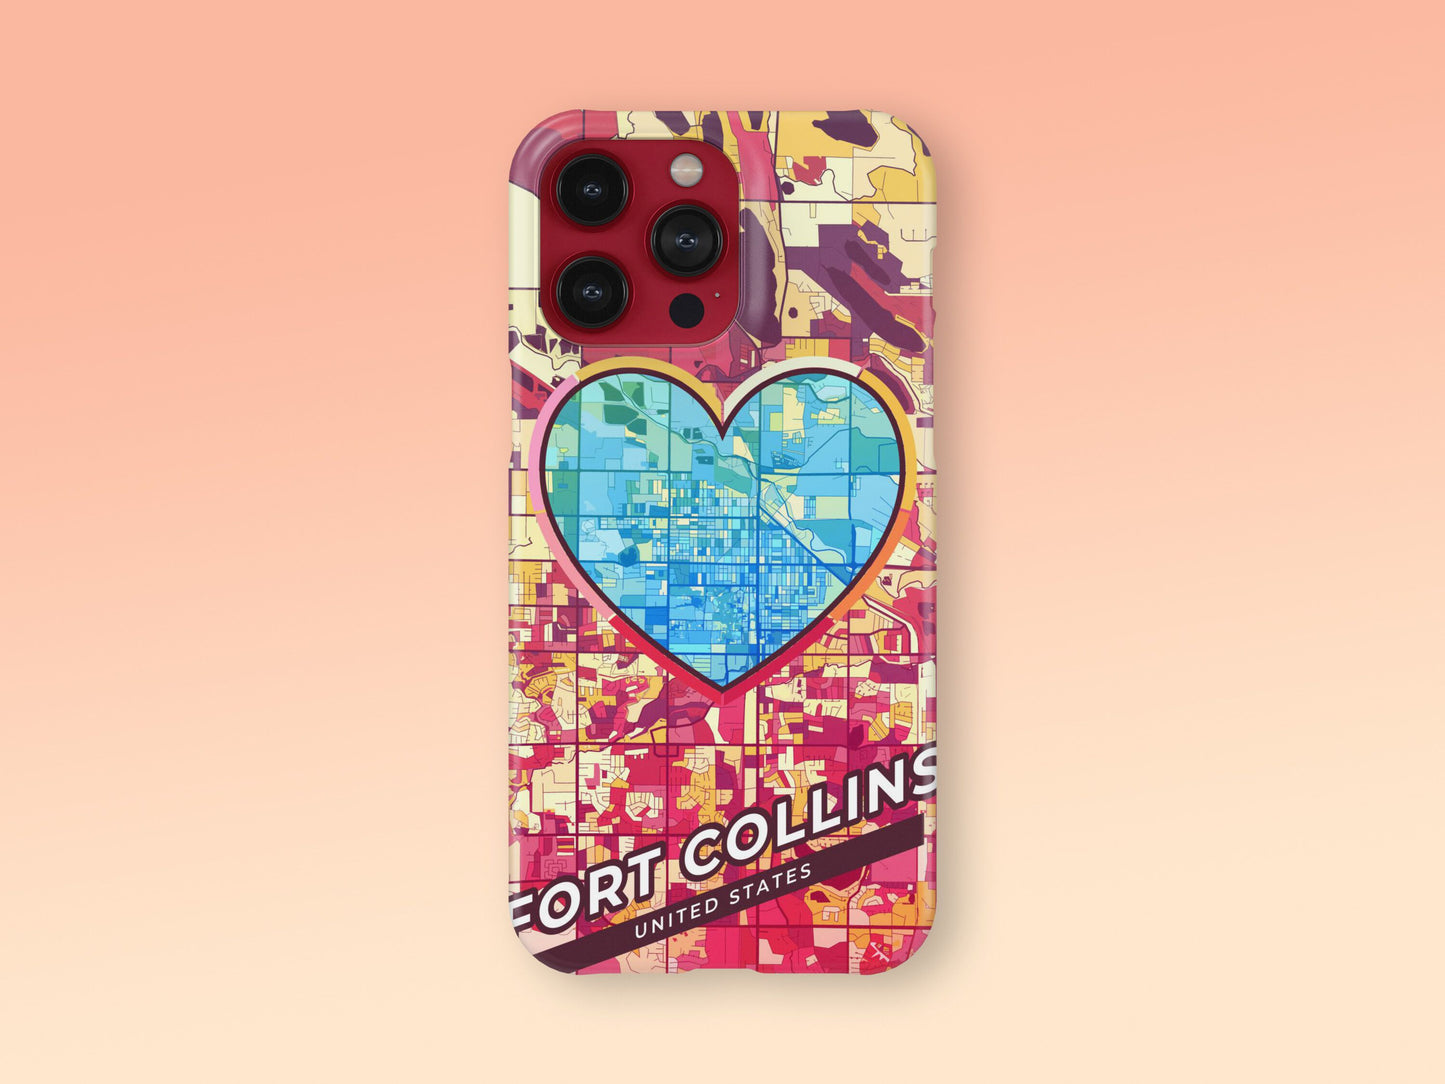 Fort Collins Colorado slim phone case with colorful icon. Birthday, wedding or housewarming gift. Couple match cases. 2